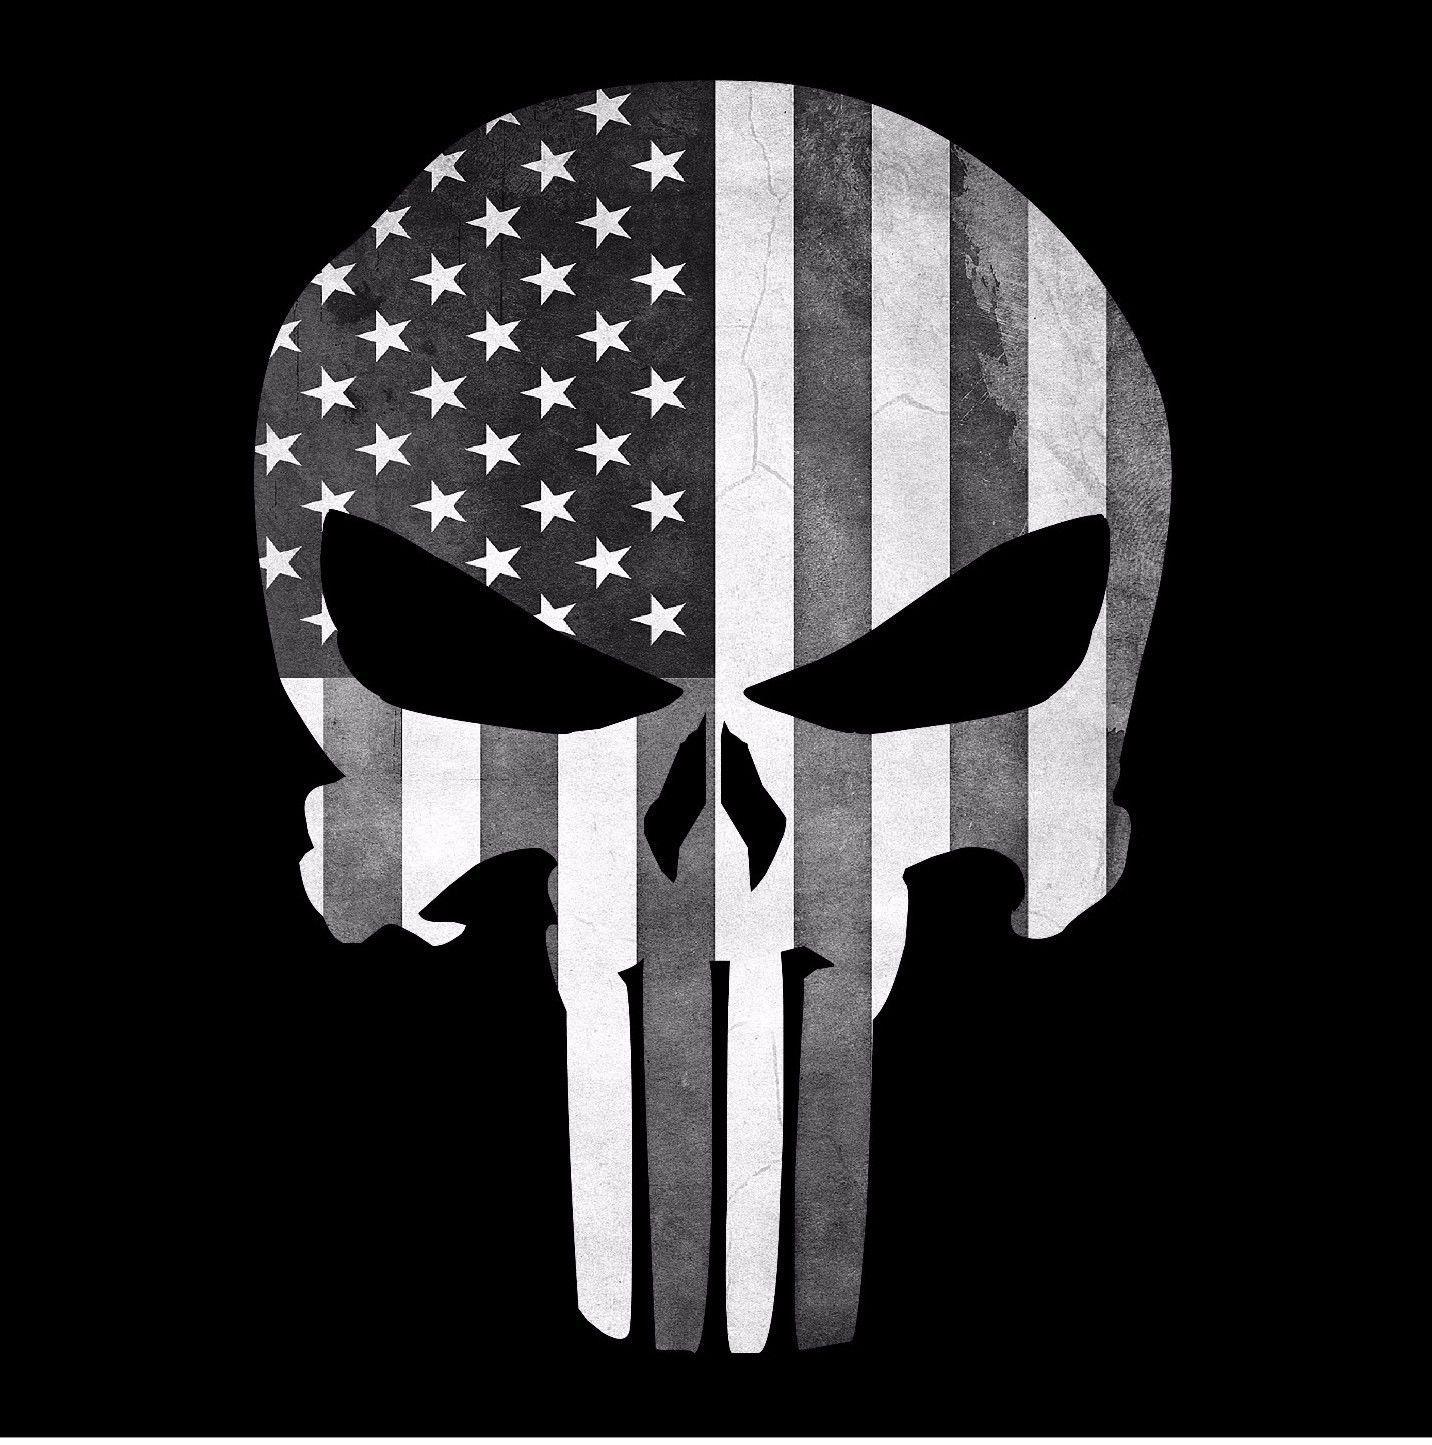 Black and White Punisher Logo - Punisher Skull American Flag (Black and White) Decal Sticker Graphic ...